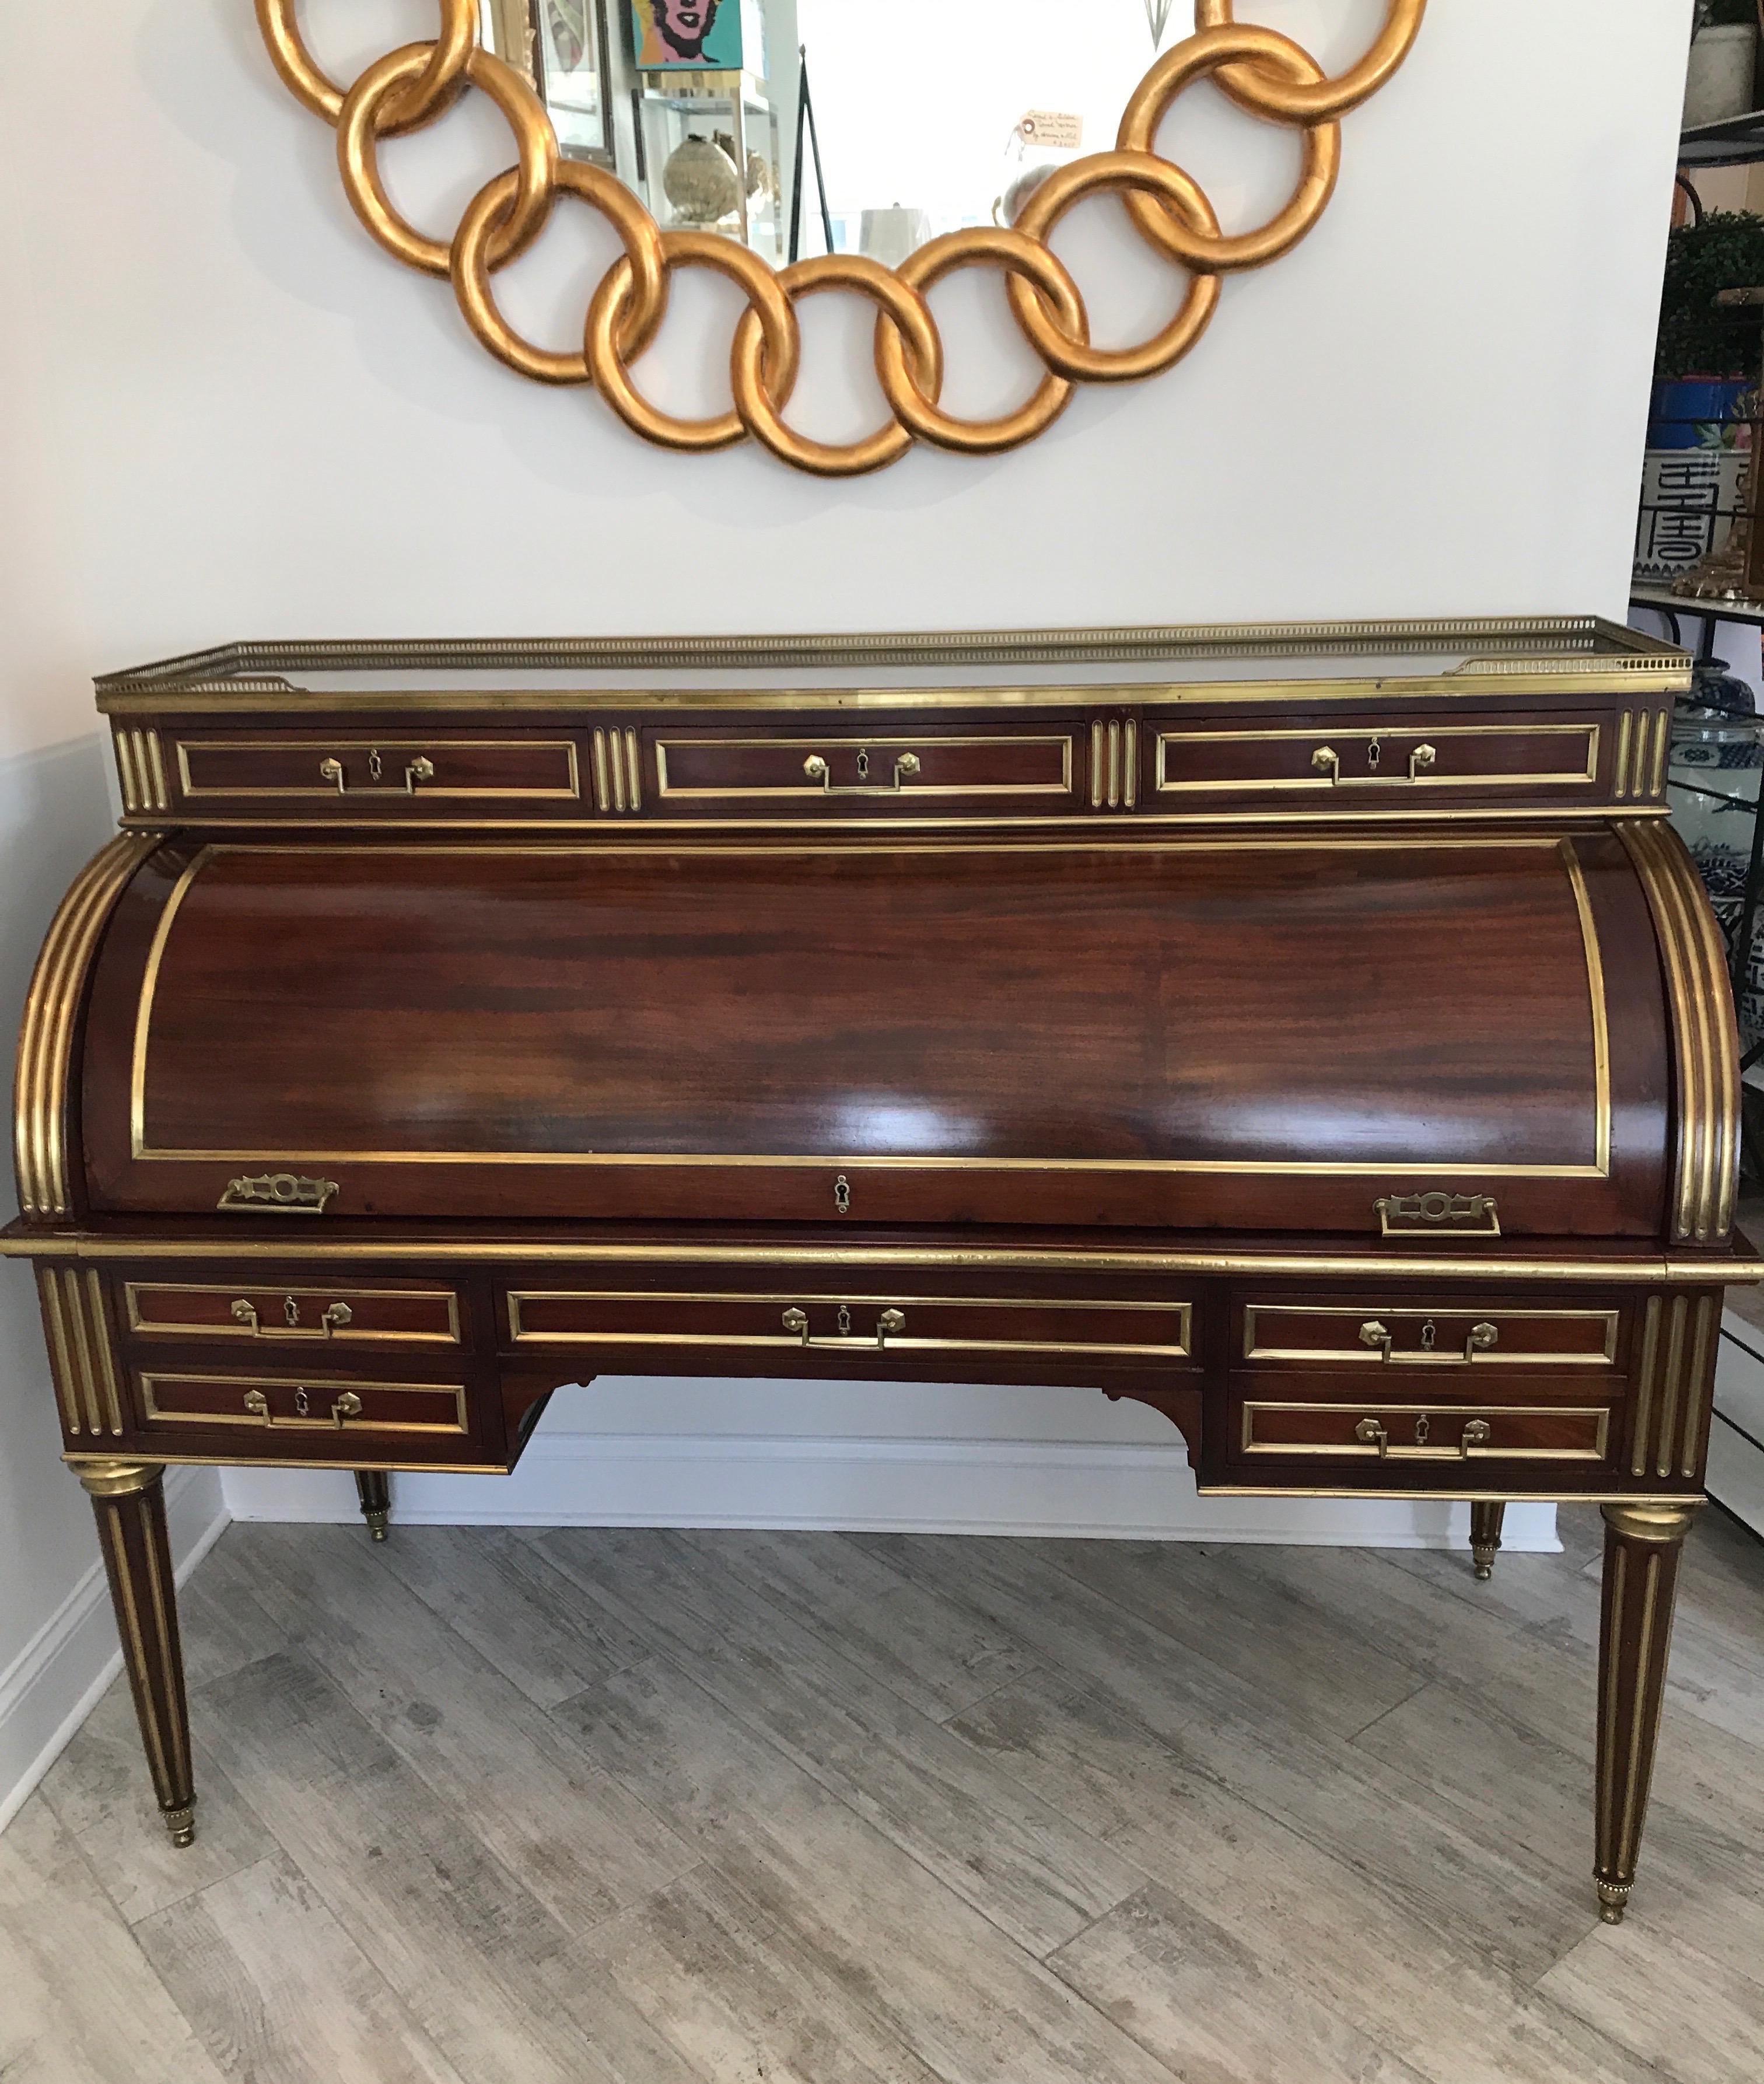 Striking antique French cylinder desk with many drawers and compartments. Pull out leather writing surface. Galleried marble top and fitted with brass inlay's.